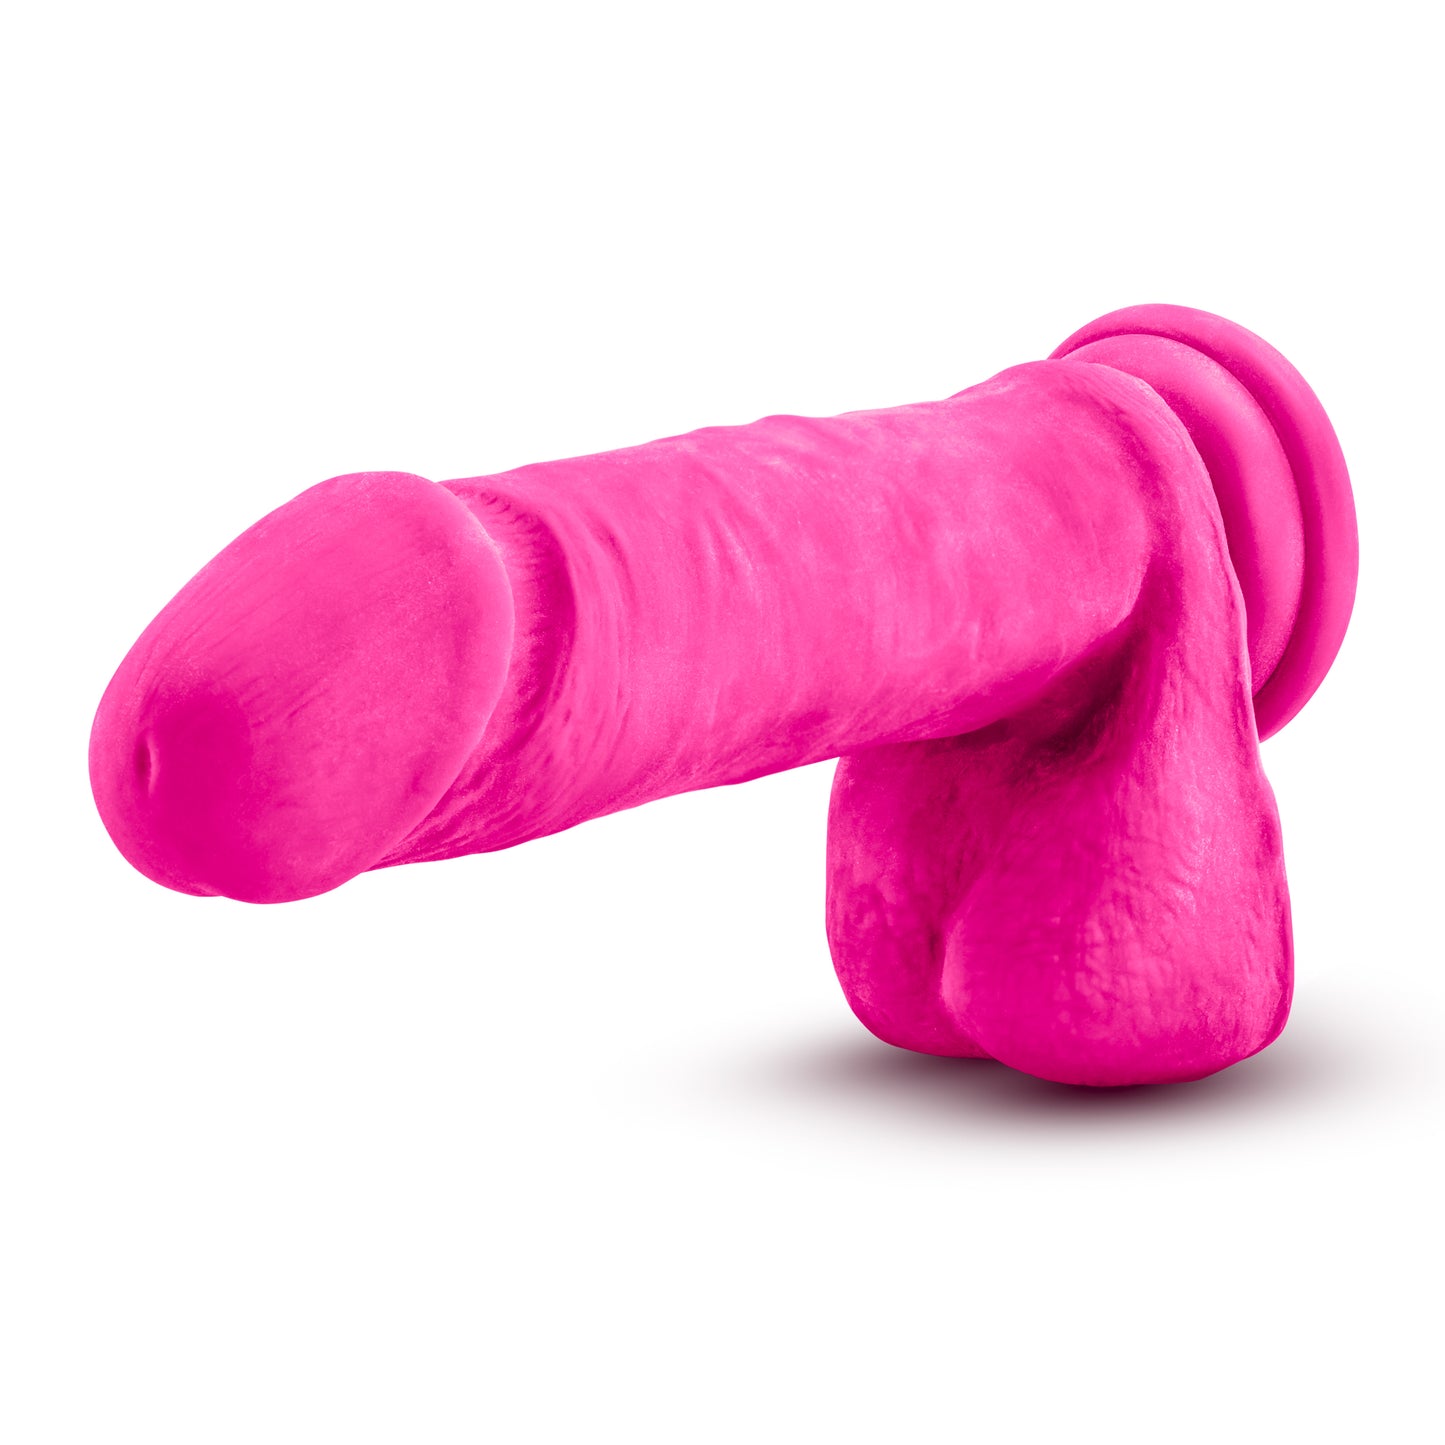 Au Naturel Bold Hero 8in Dildo Pink - Just for you desires